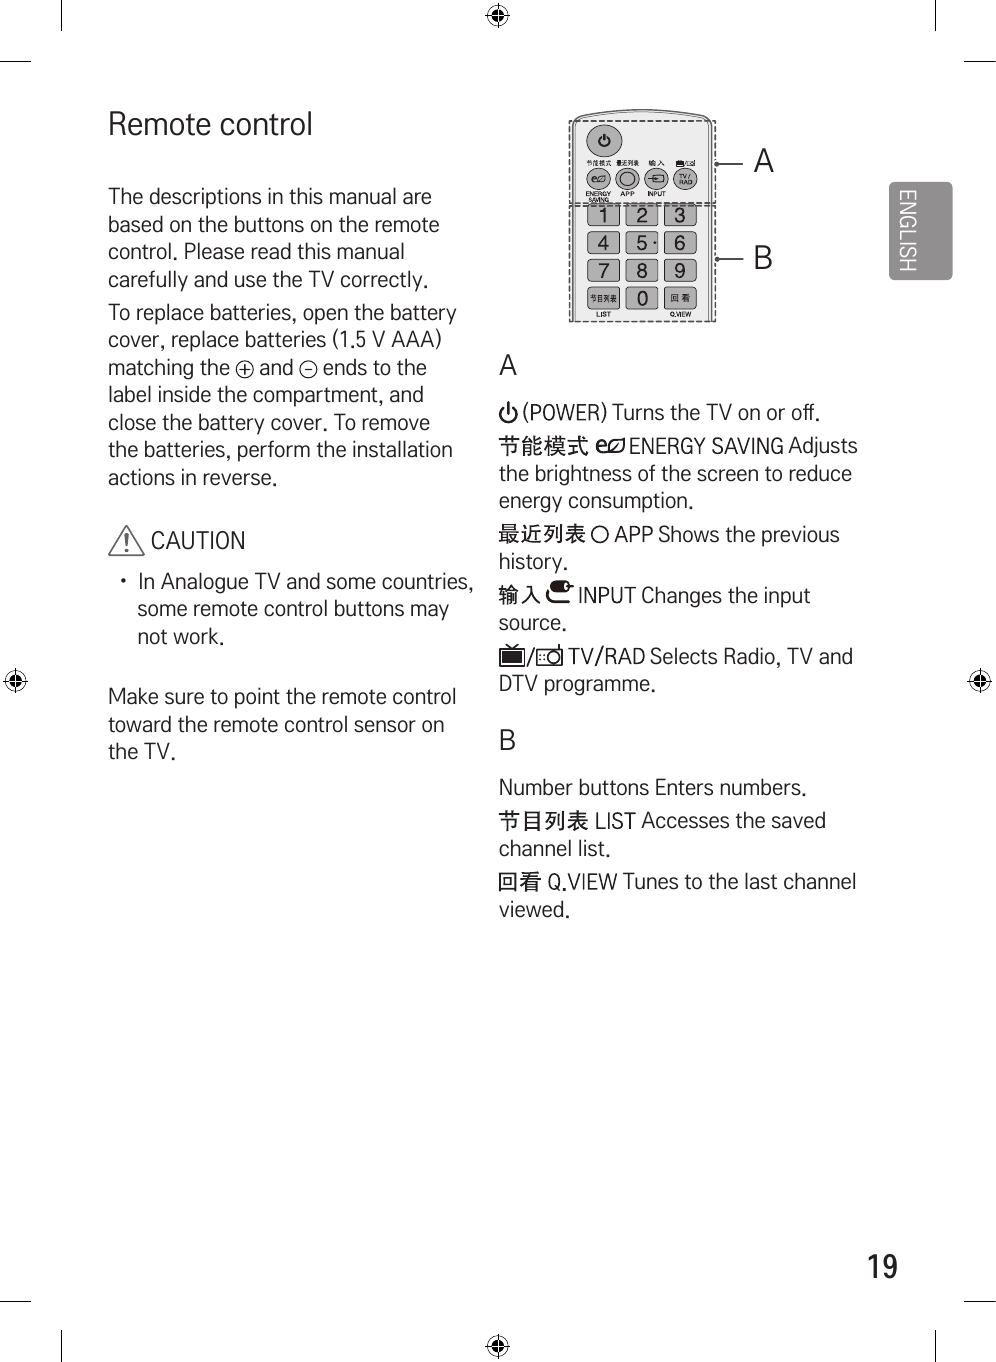 ENGLISH19Remote controlThe descriptions in this manual are based on the buttons on the remote control. Please read this manual carefully and use the TV correctly.To replace batteries, open the battery cover, replace batteries (1.5 V AAA) matching the   and   ends to the label inside the compartment, and close the battery cover. To remove the batteries, perform the installation actions in reverse. CAUTION•  In Analogue TV and some countries, some remote control buttons may not work. Make sure to point the remote control toward the remote control sensor on the TV. ABA  Turns the TV on or o󷕔.   Adjusts the brightness of the screen to reduce energy consumption.     Shows the previous history.     Changes the input source.   Selects Radio, TV and DTV programme.BNumber buttons Enters numbers. Accesses the saved channel list. Tunes to the last channel viewed.